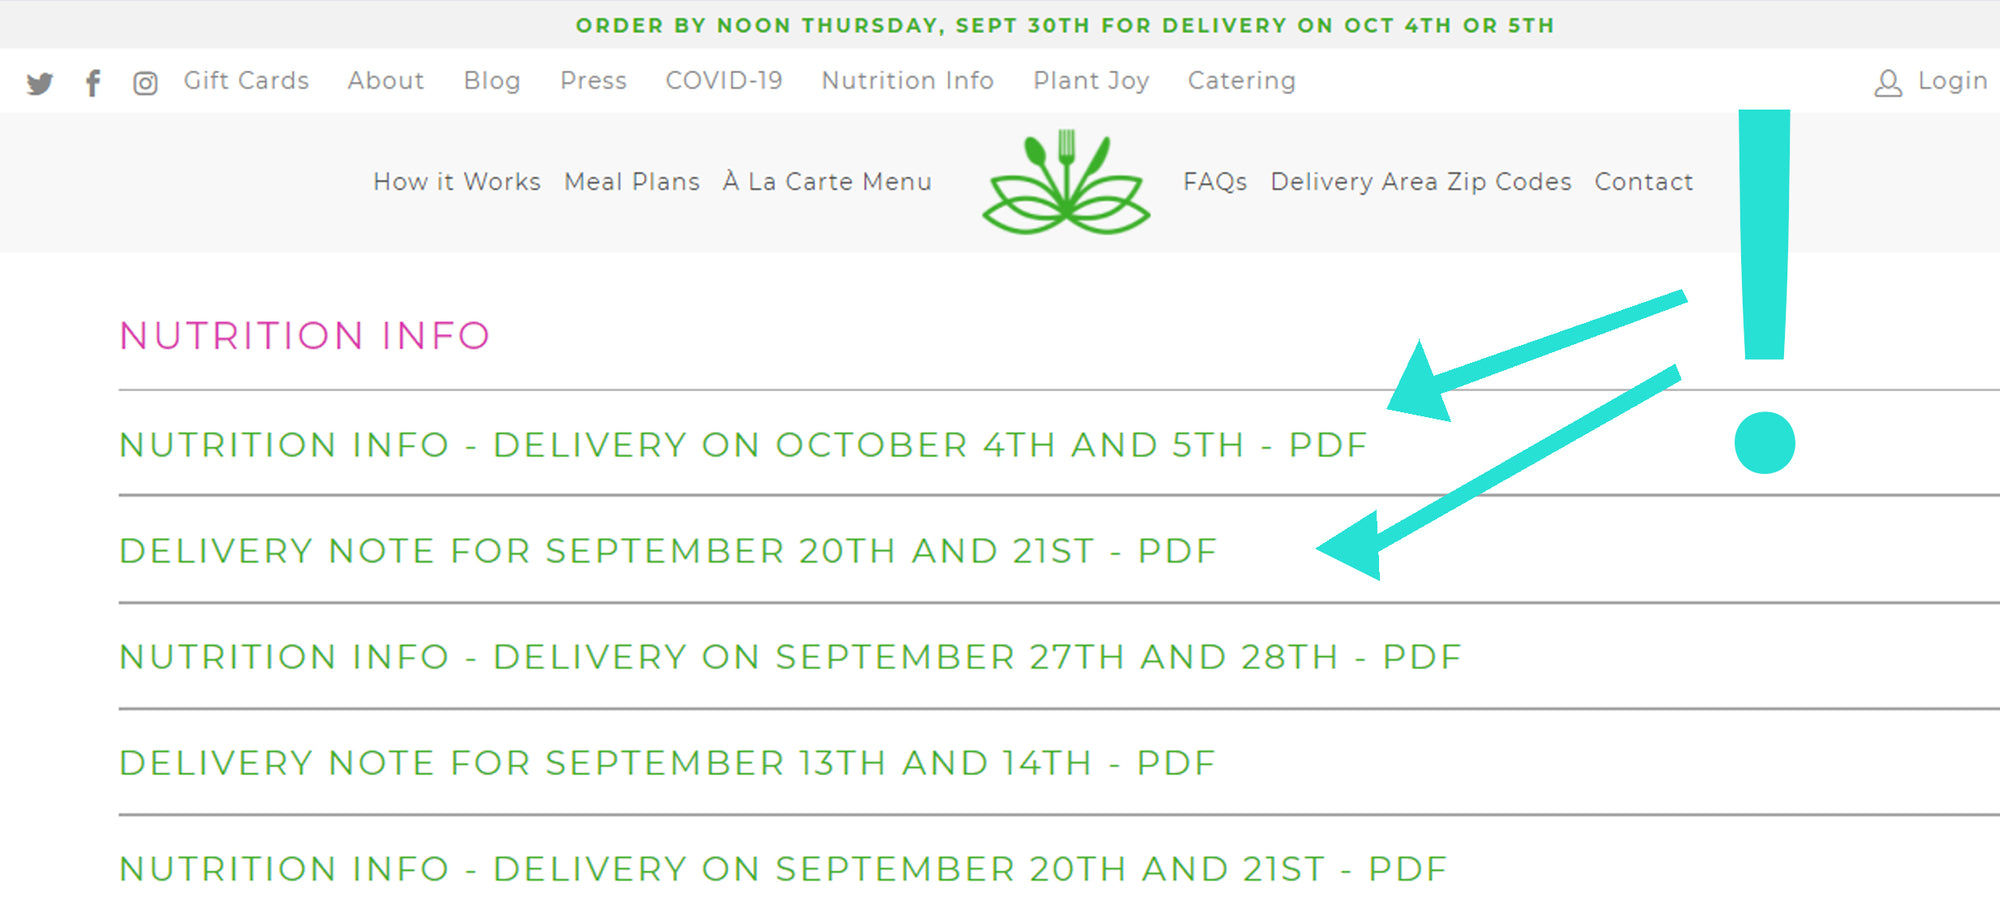 Don't miss your Delivery Note or Nutritional Data for each week's menu!